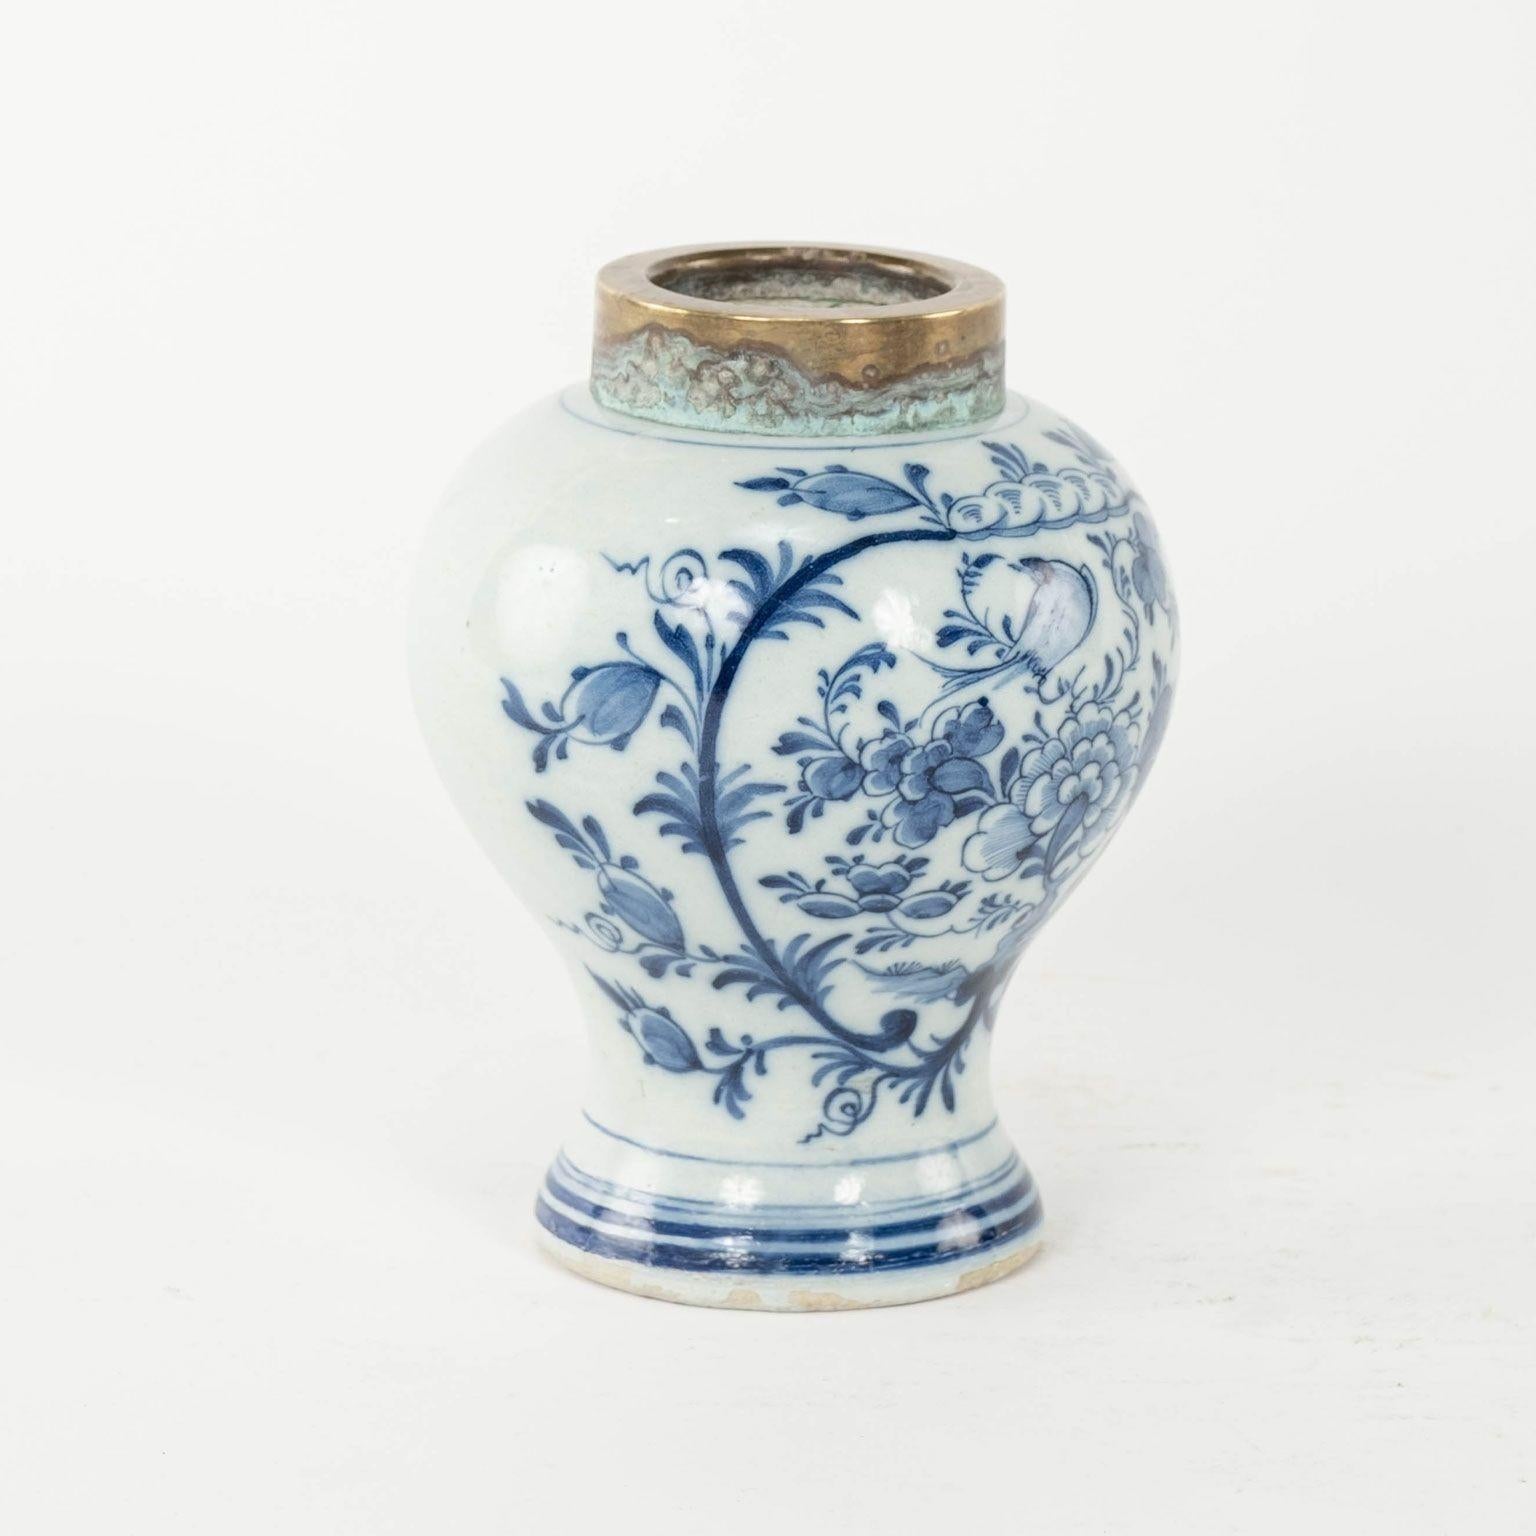 Petite blue & white delft tobacco jar with gilded metal rim circa 1830. Neoclassical scrolling floral decoration.

Note: Original/early finish on antique and vintage metal will include some, or all, of the following: patina, scaling, light rust,